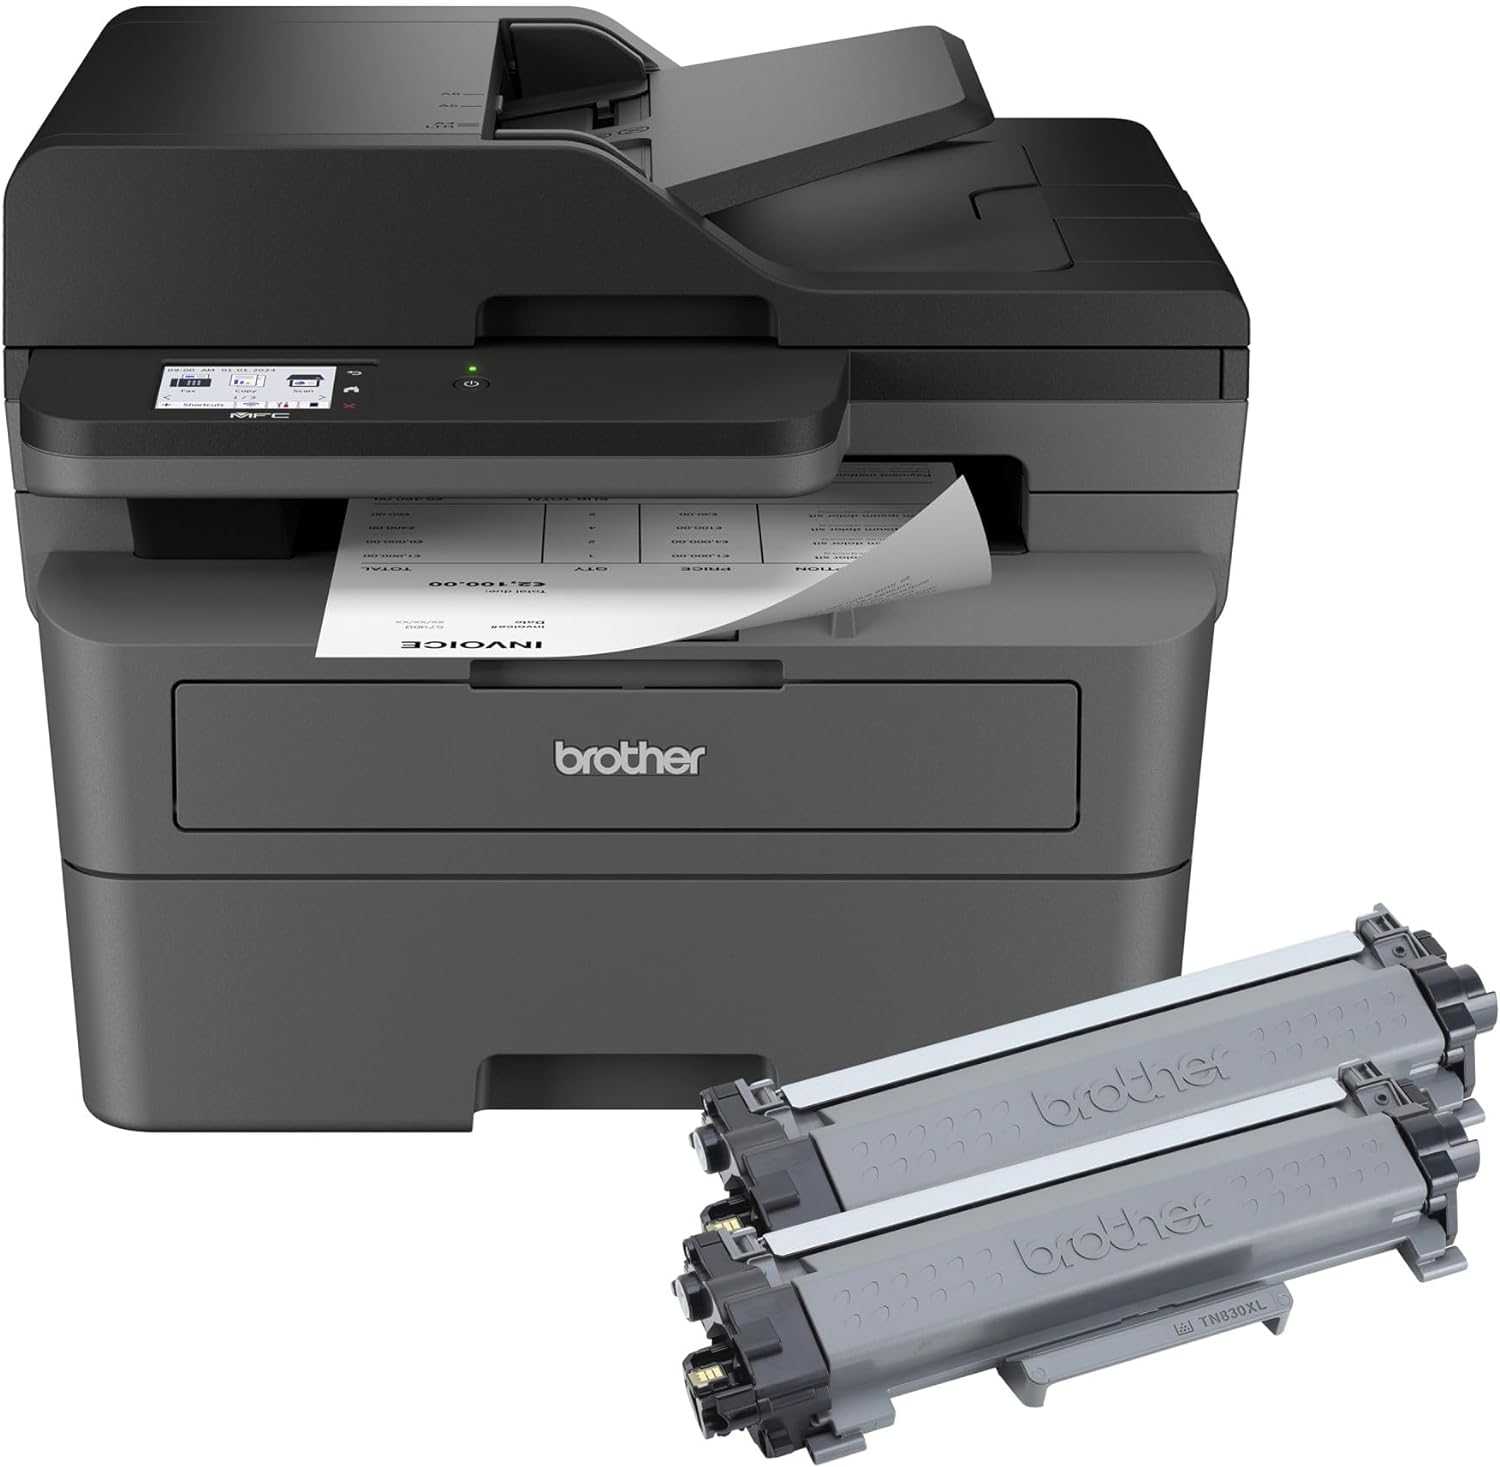 Brother Wireless MFC-L2820DW XL Compact Monochrome All-in-One Laser Printer